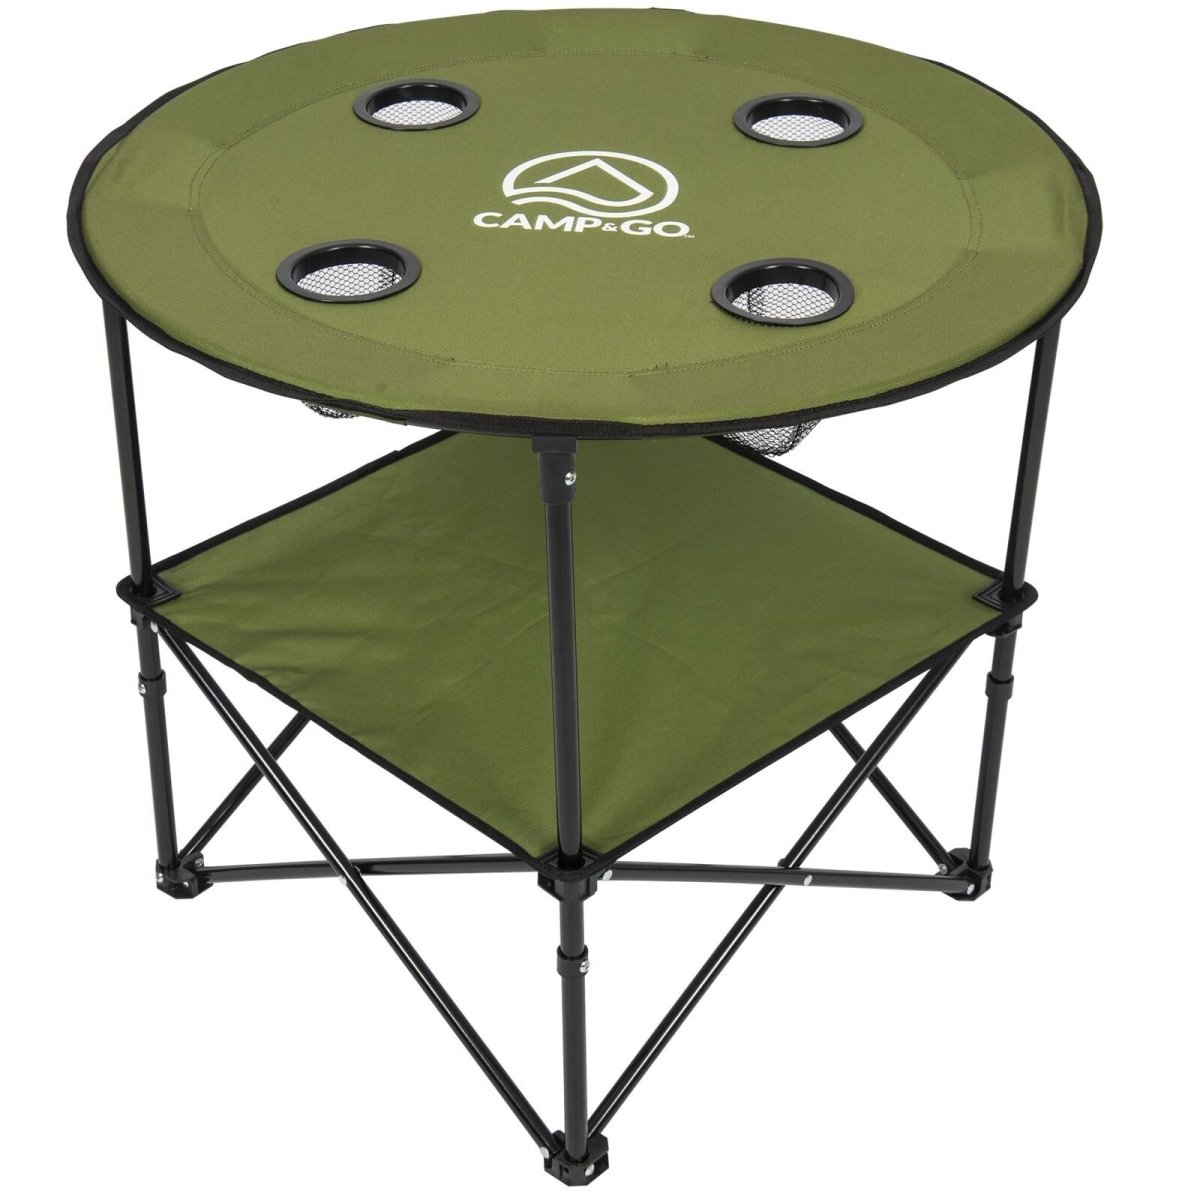 ASIFTR28-454-1 28 in. Dia. Rio Fabric Round Portable Table, Moss Green -  Arrow Storage Products